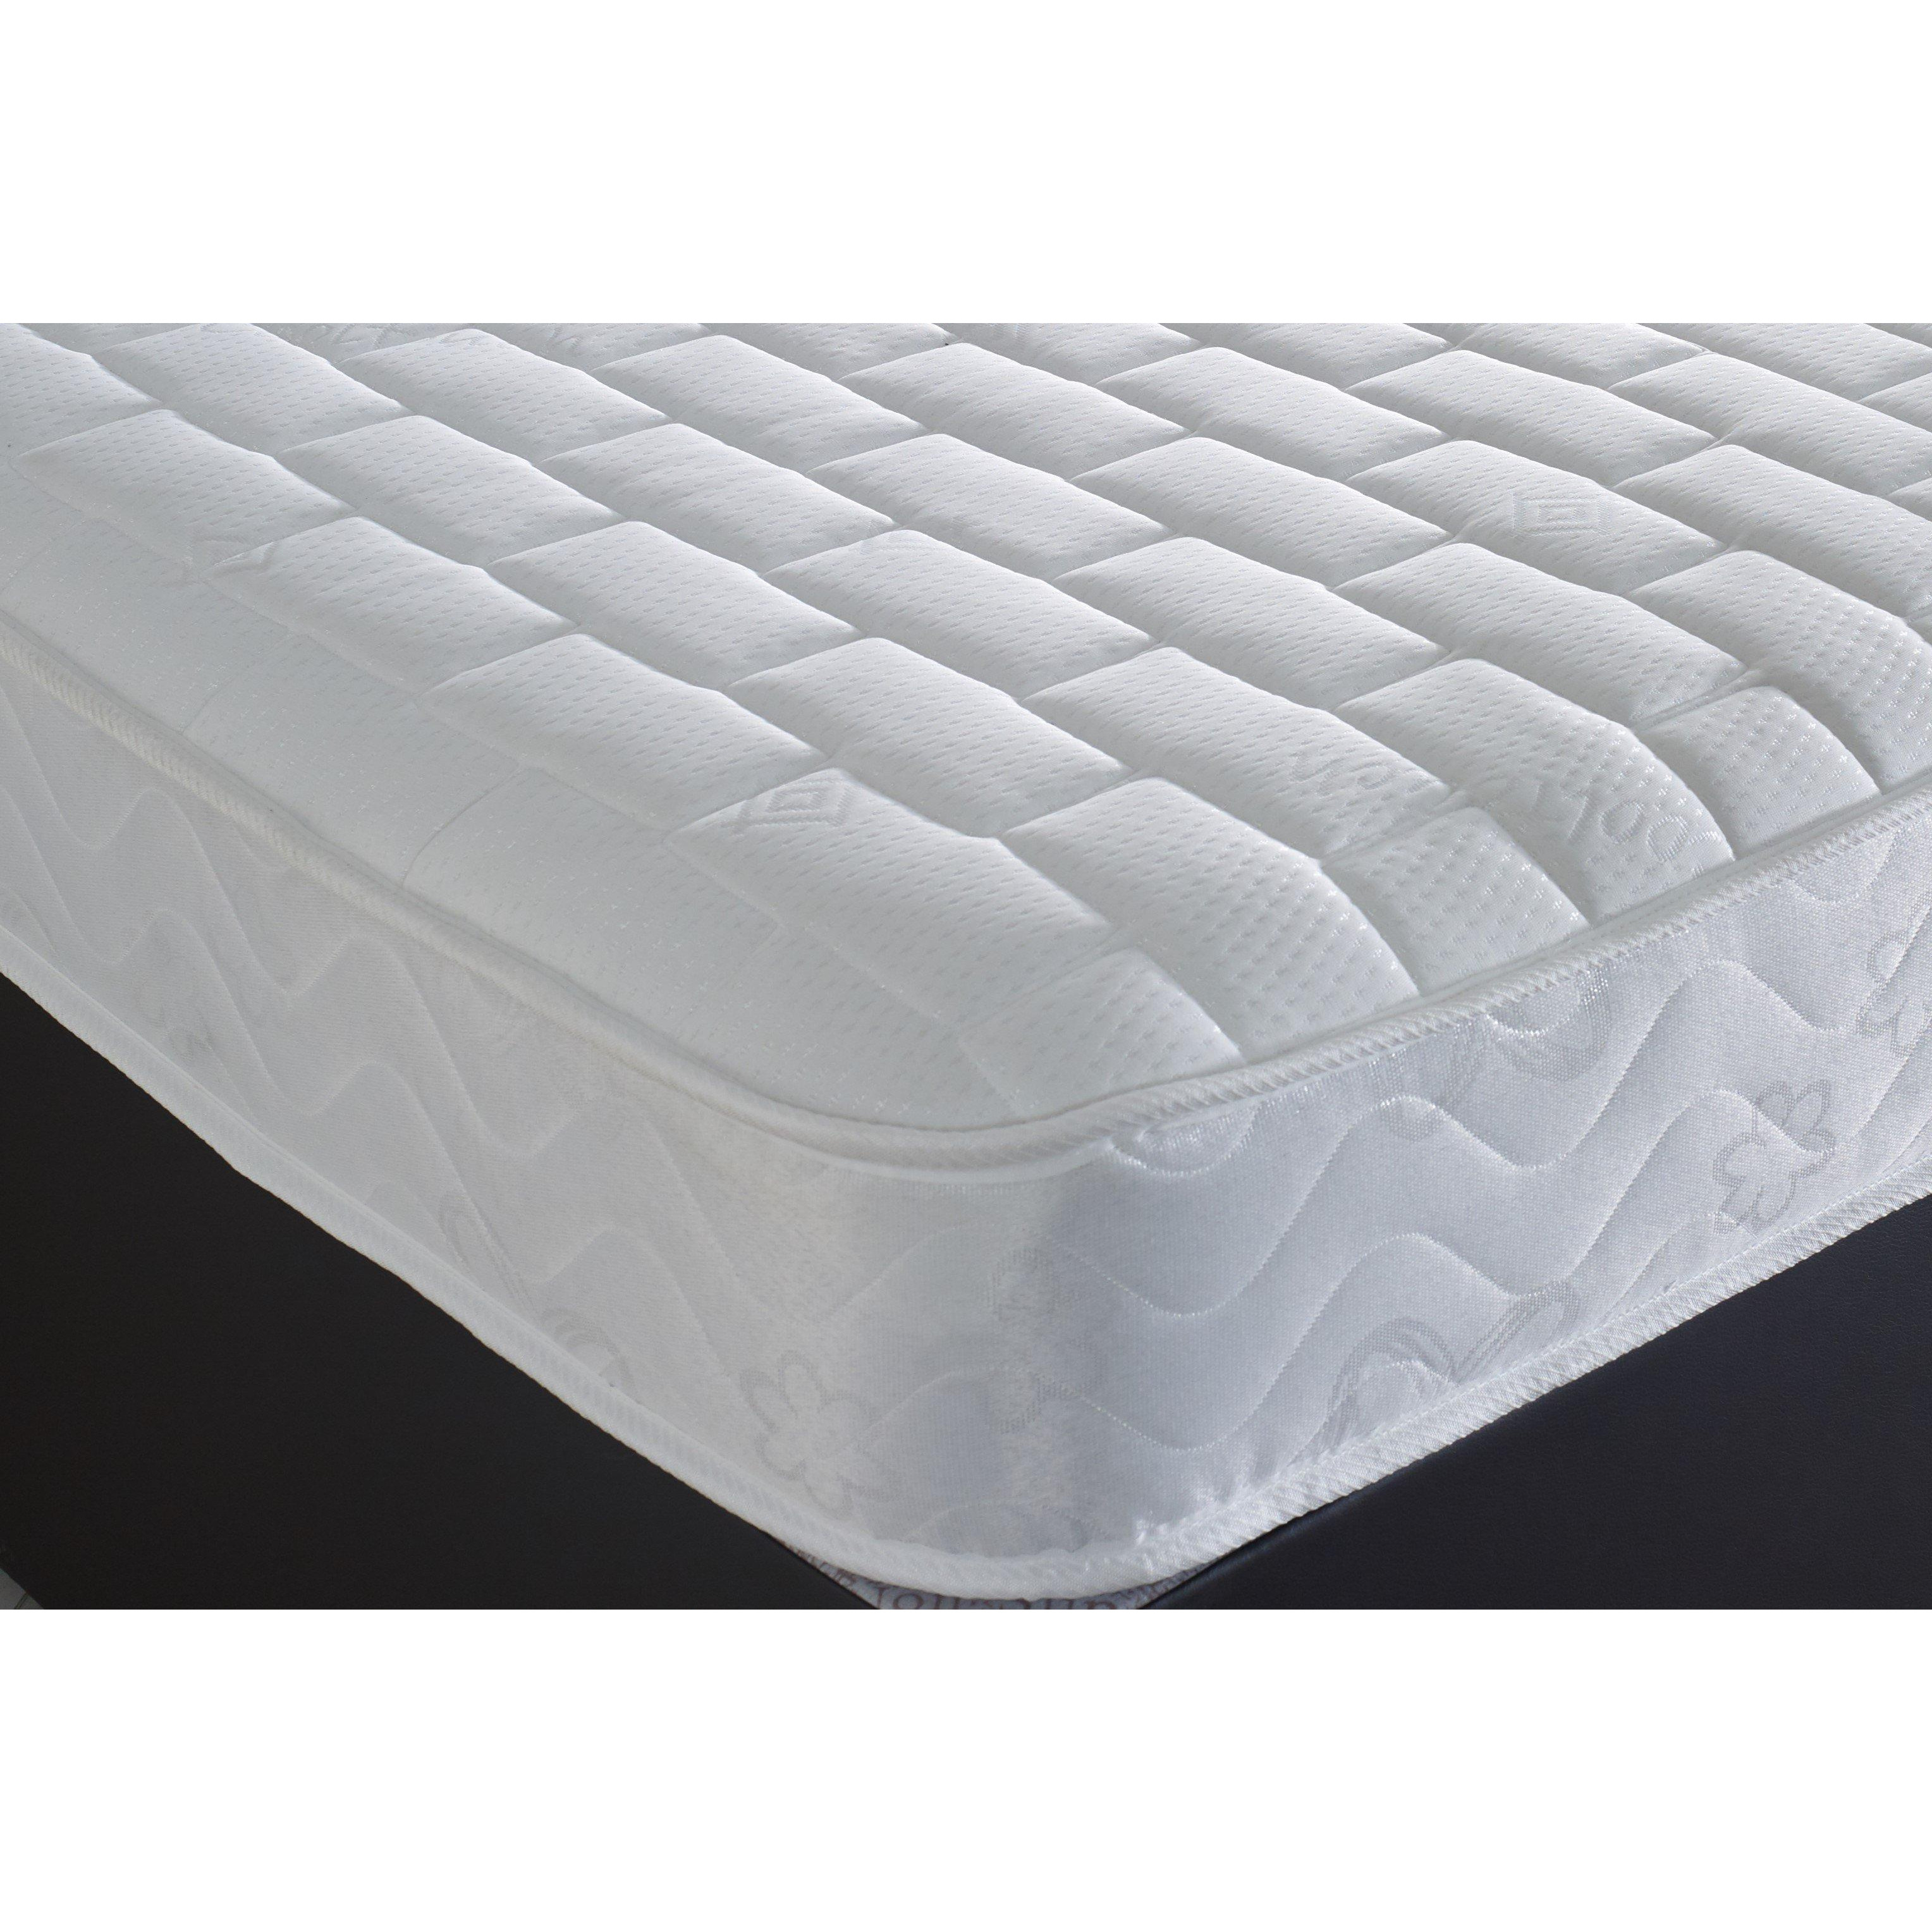 Soft Memory Foam Spring Micro Quilted Mattress - image 1